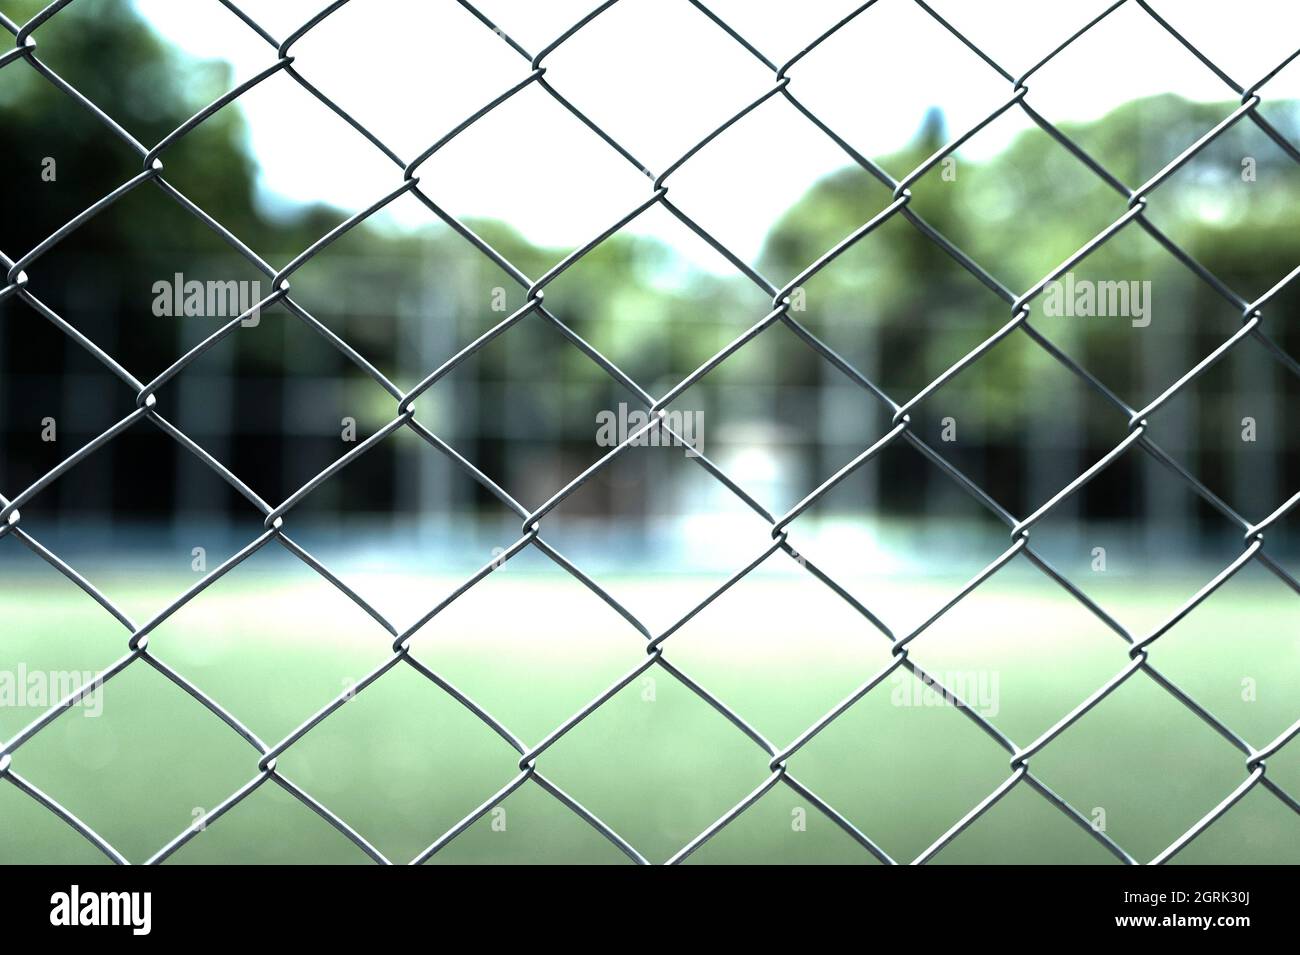 Security, prisoner, prison, fence, wire mesh, restricted area. Stock Photo